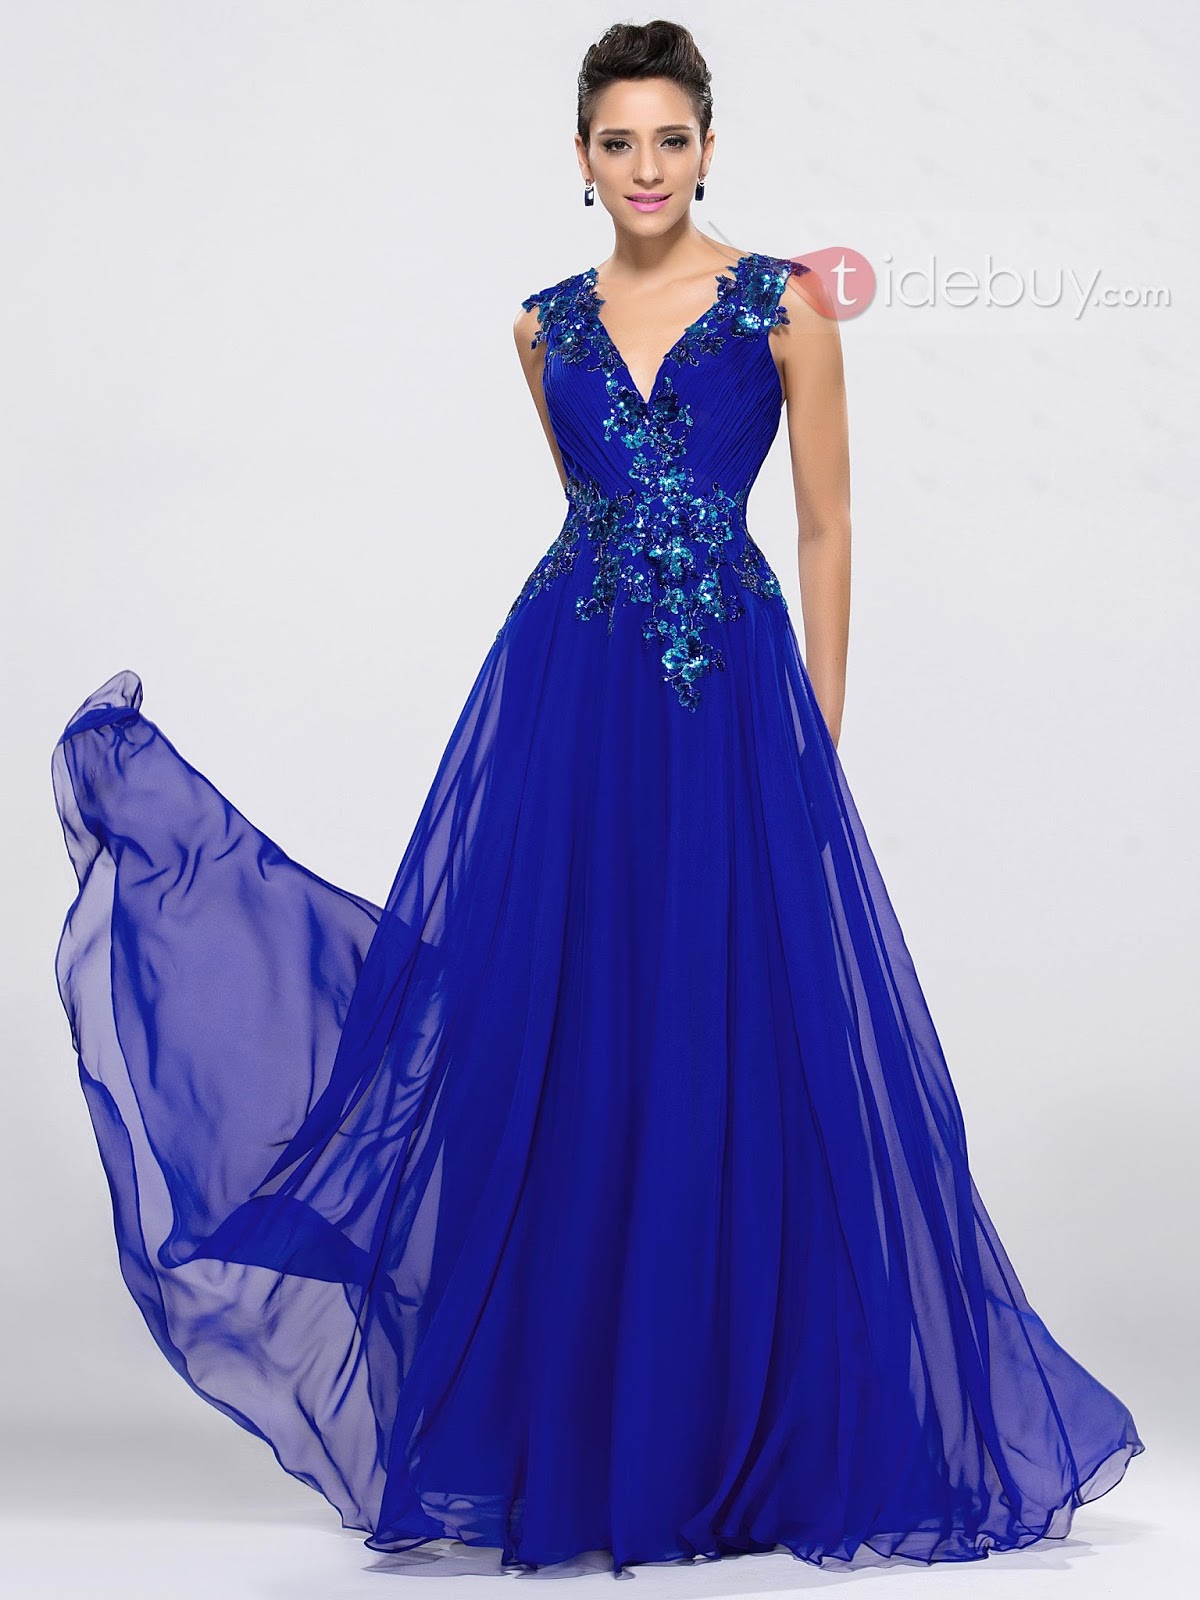 Jeeya's Beauty & Fashion Blog: Special Occasion Dresses For You ...